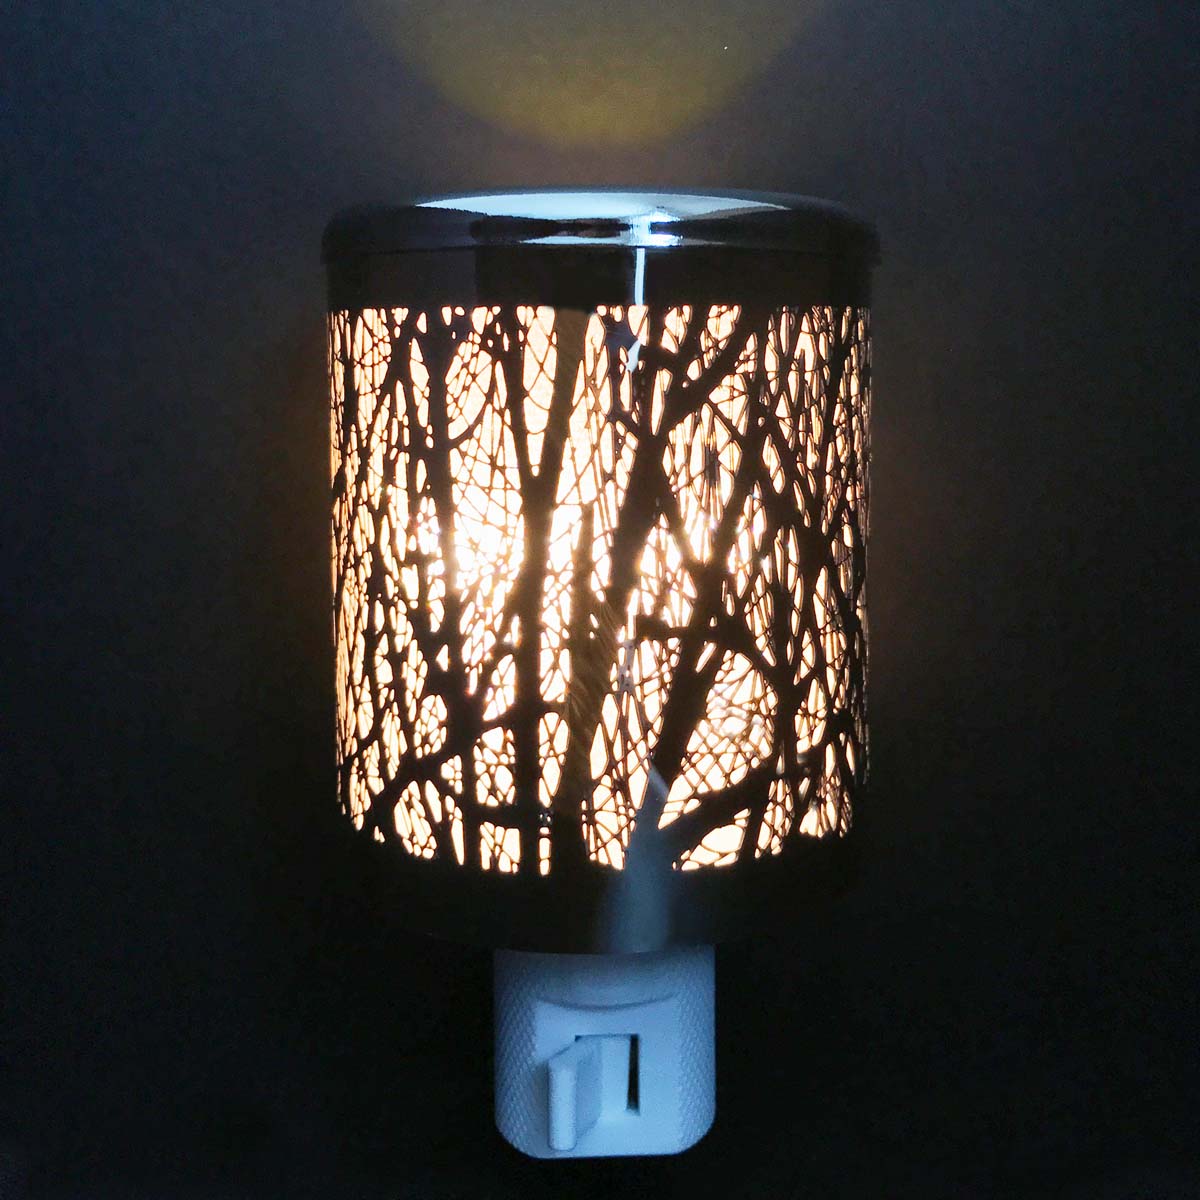 Nl1075 Aluminum Crafted Led Night Light - Forest